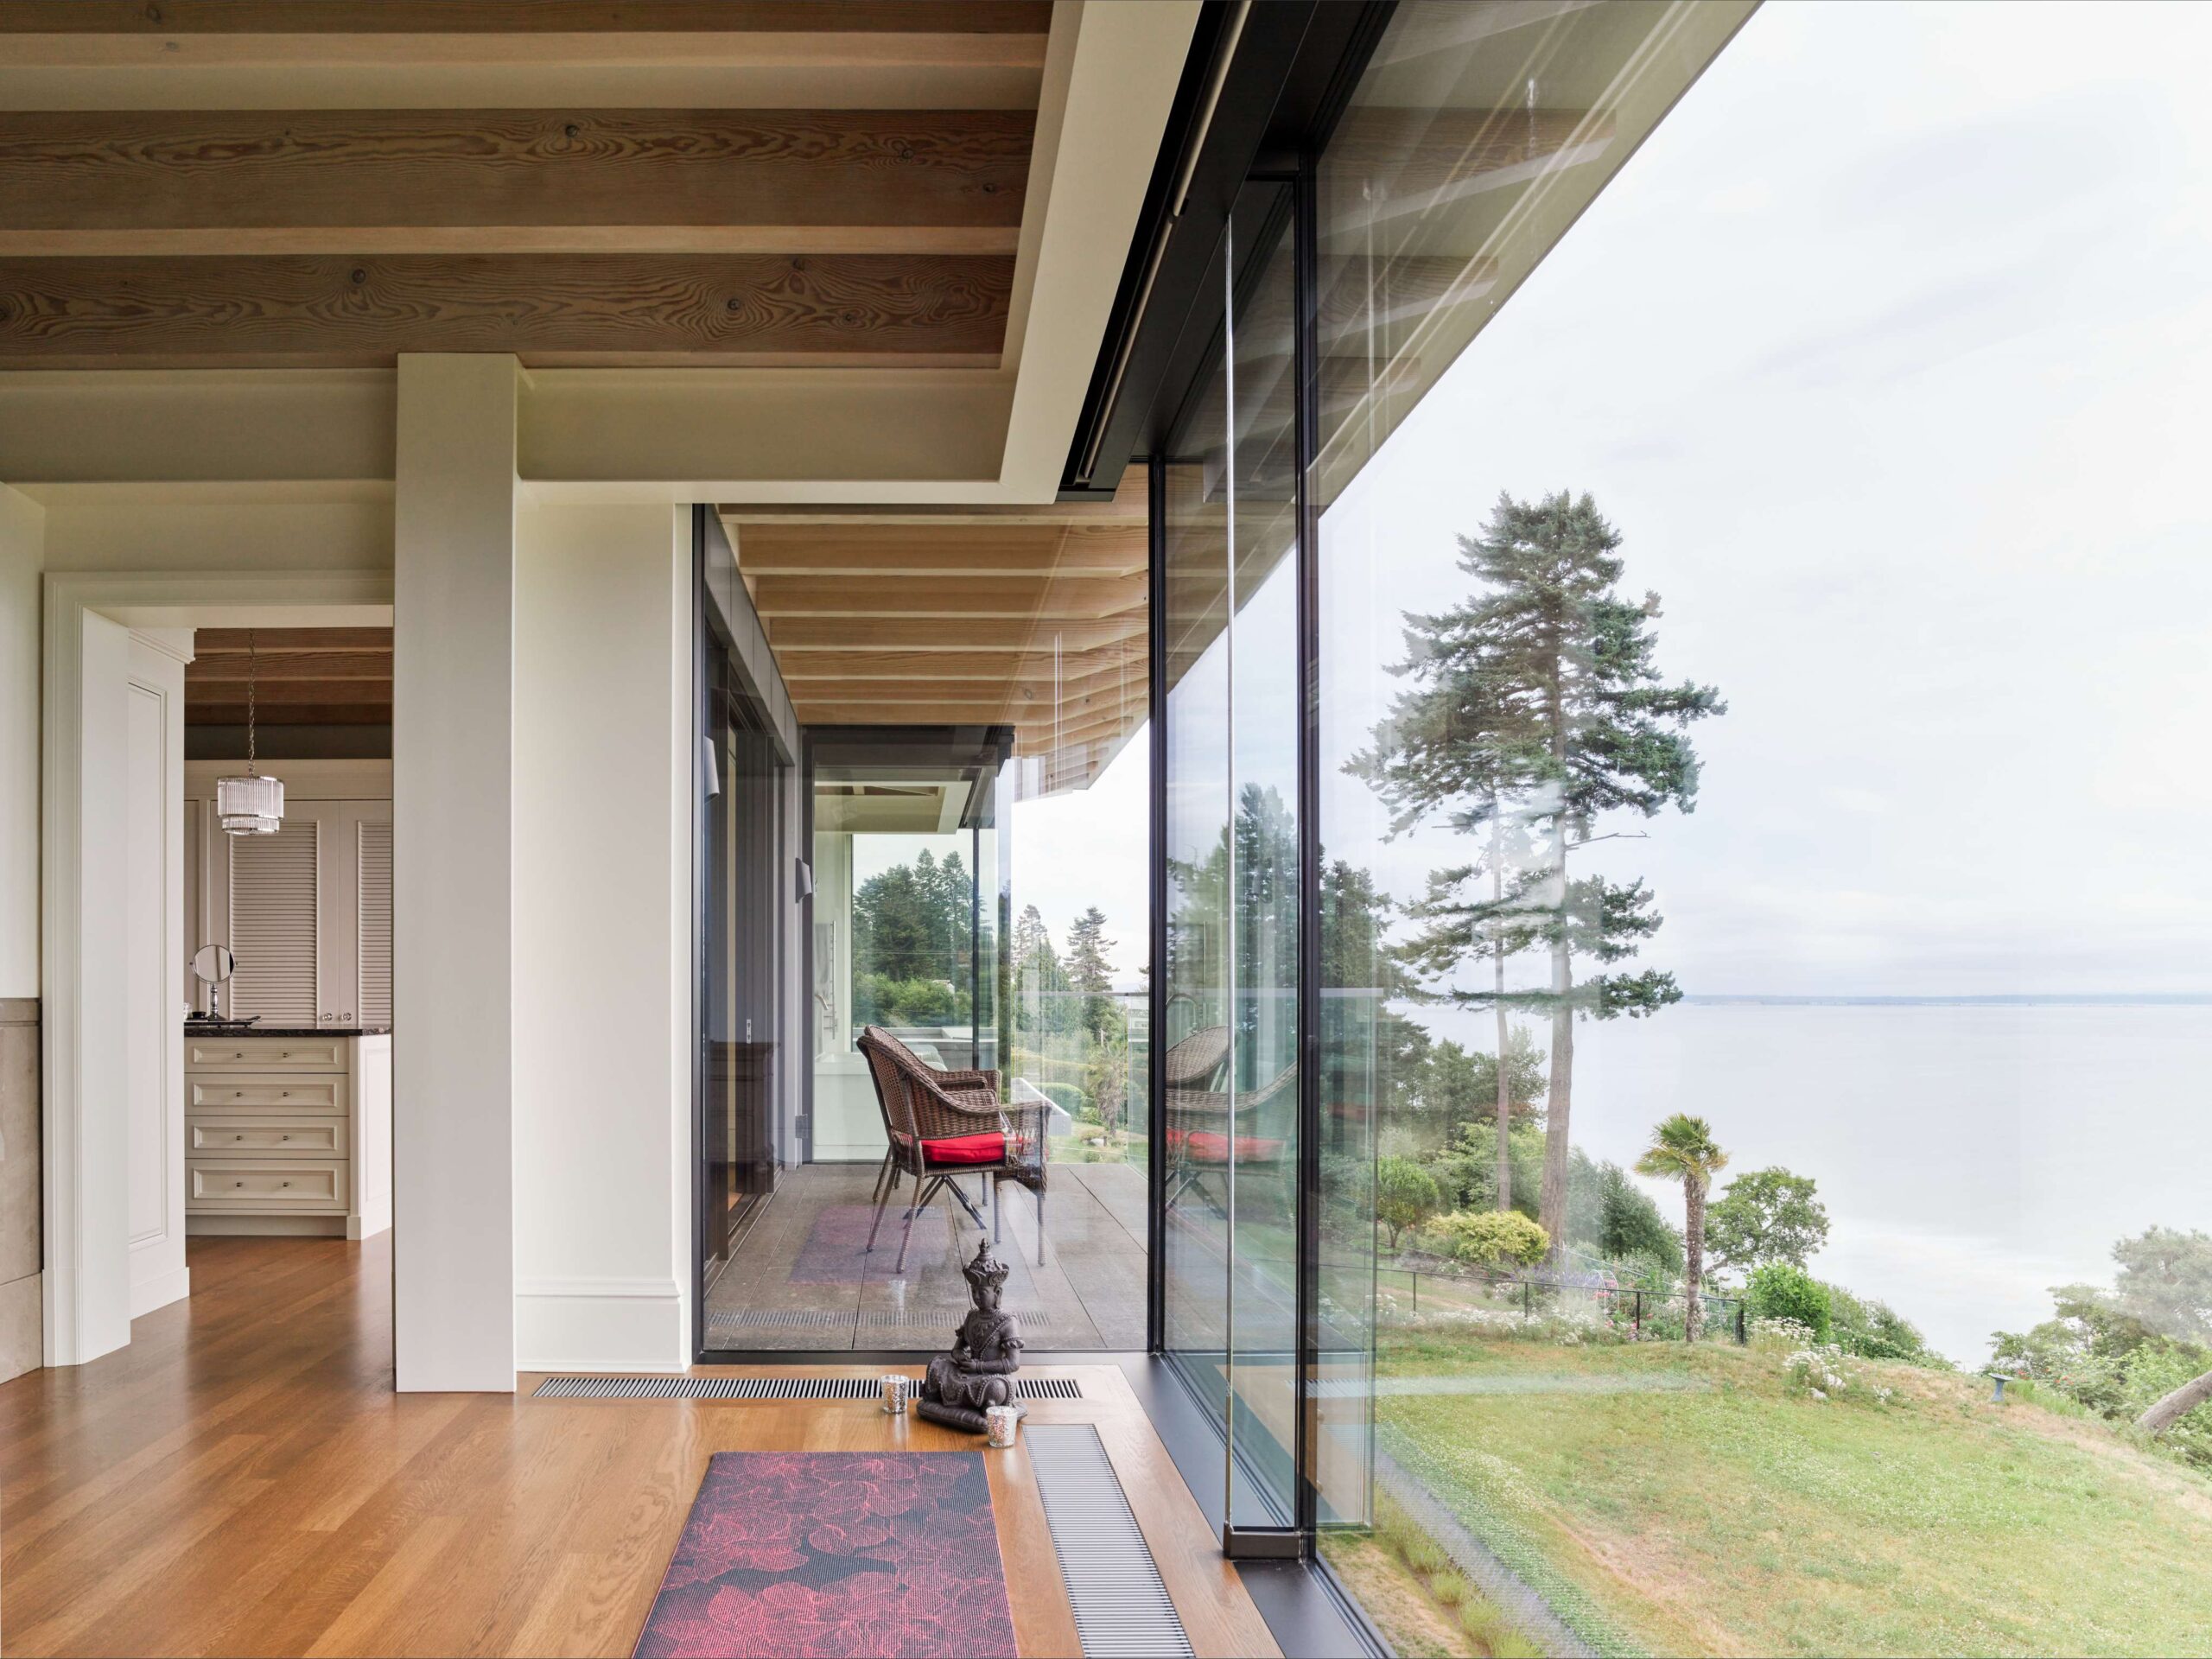 Interior and exterior of a modern home, overlooking the ocean